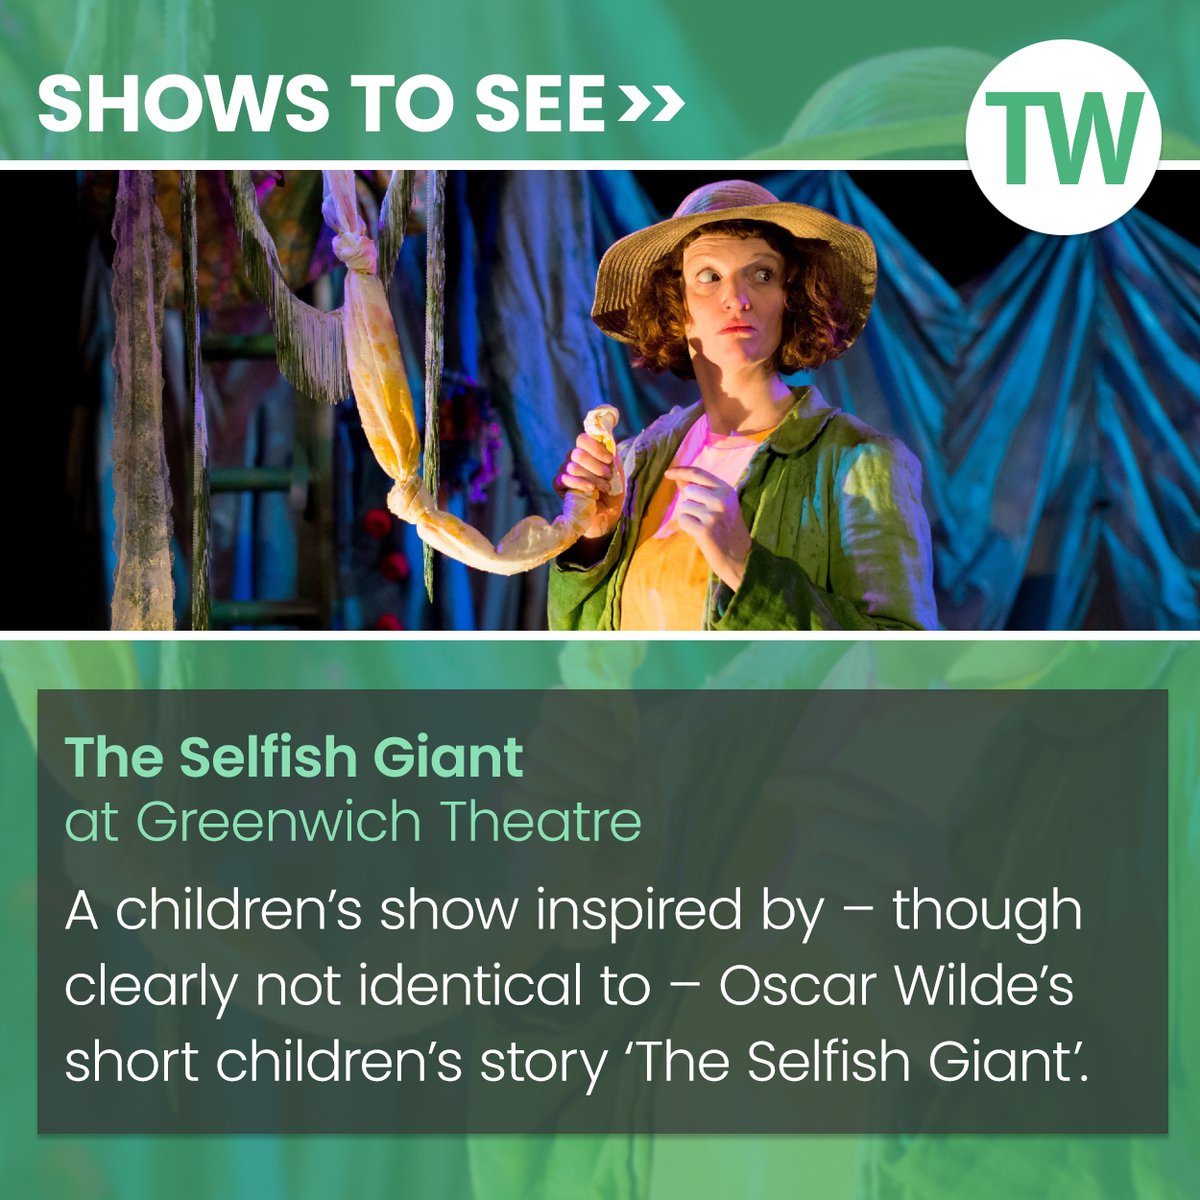 Among our recommended shows to see this week: 'The Selfish Giant' by Tiny & Tall Productions at Greenwich Theatre. Get more show tips here: bit.ly/3TORapH @GreenwichTheatr